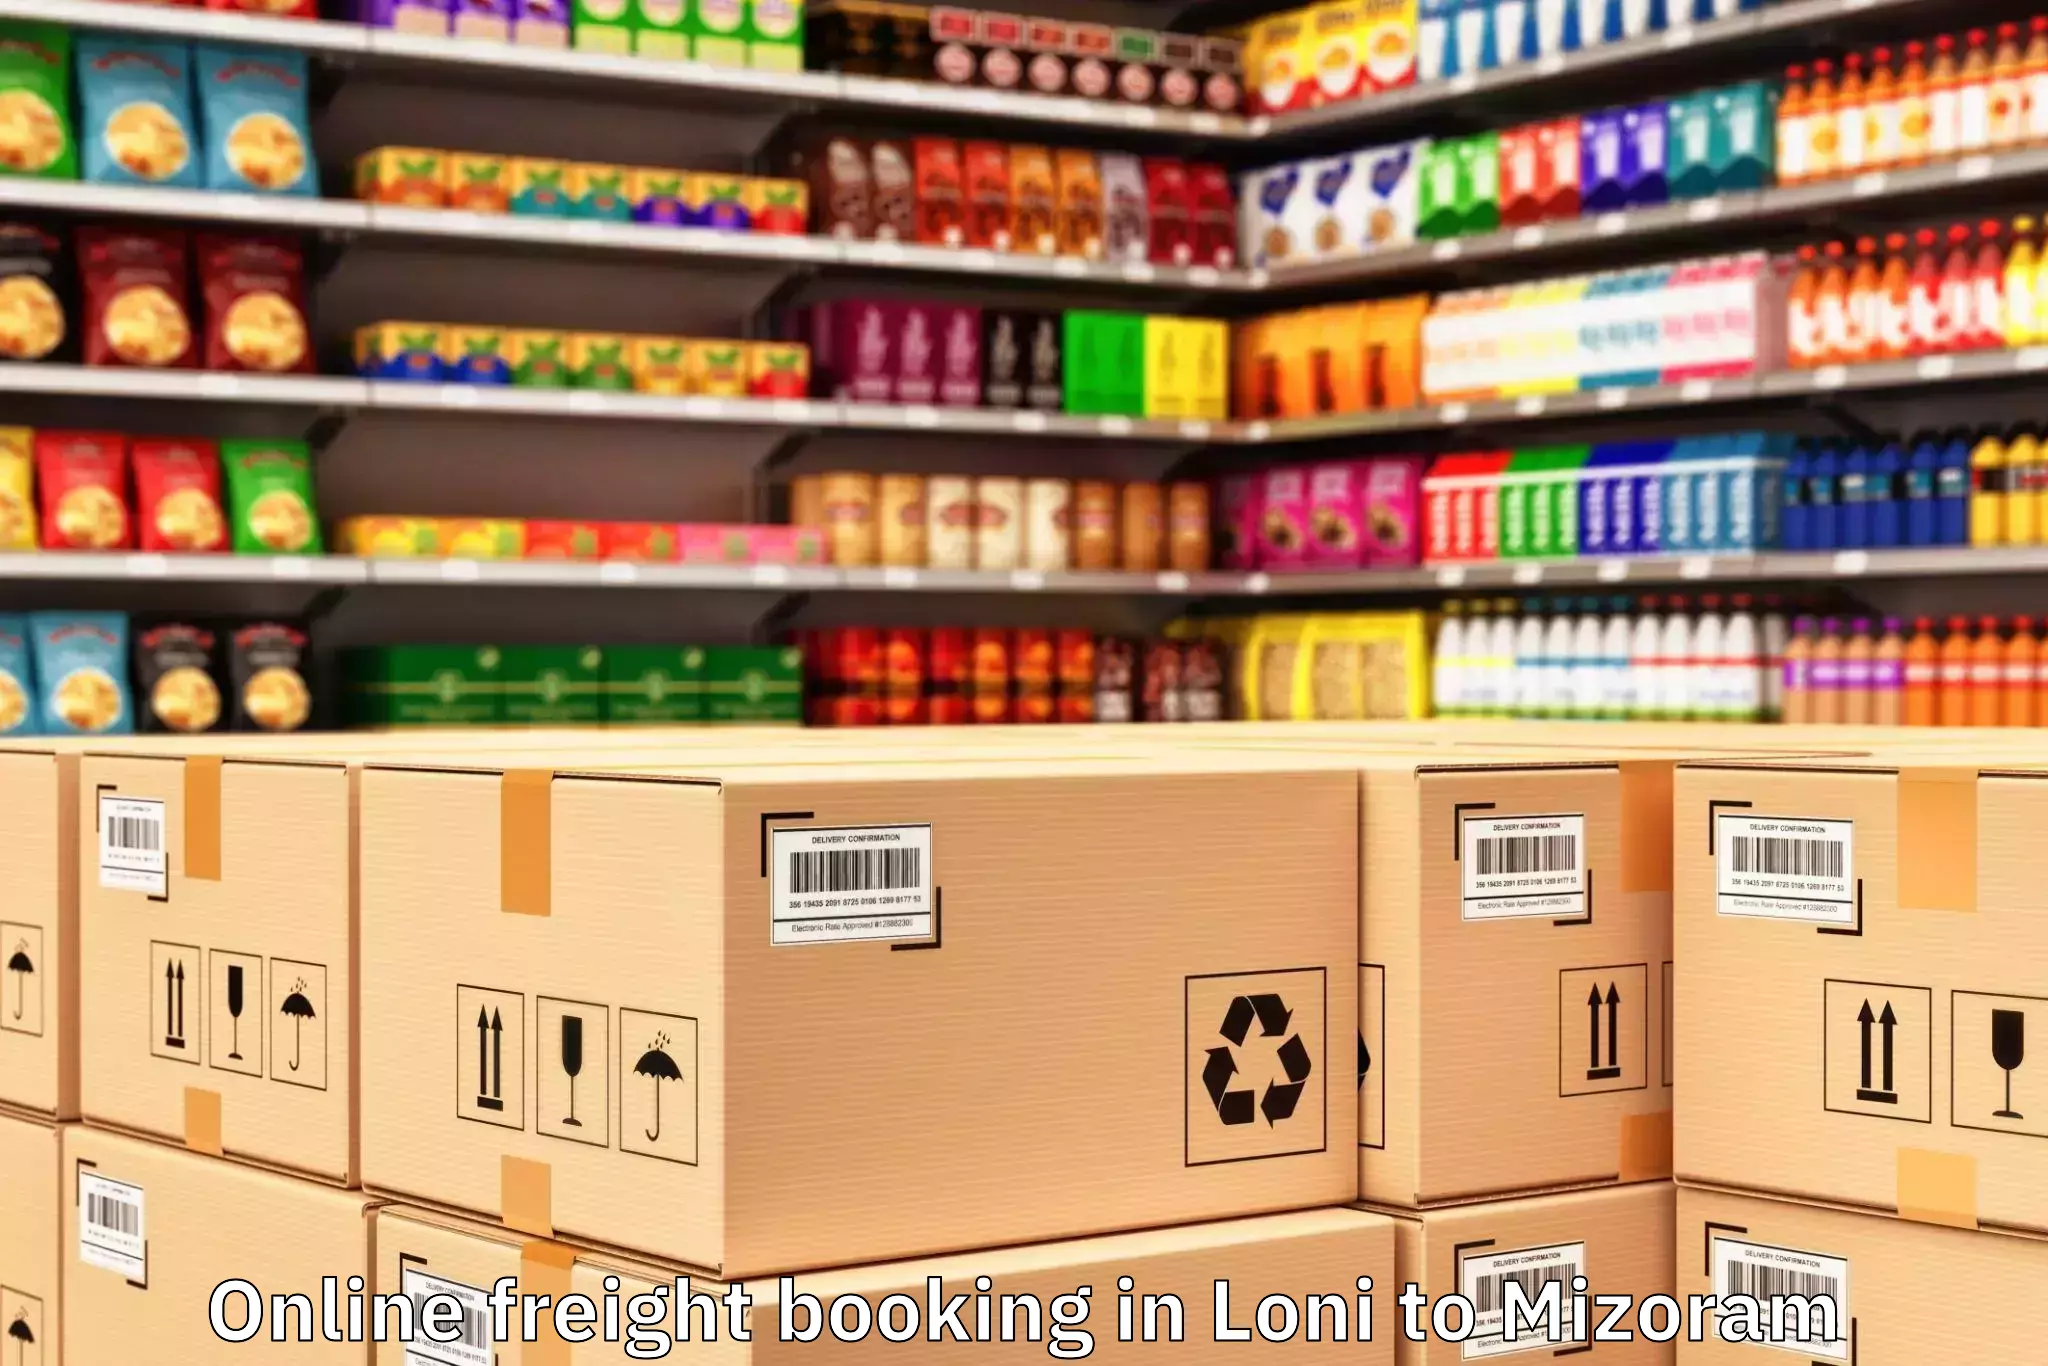 Discover Loni to S Bungtlang Online Freight Booking